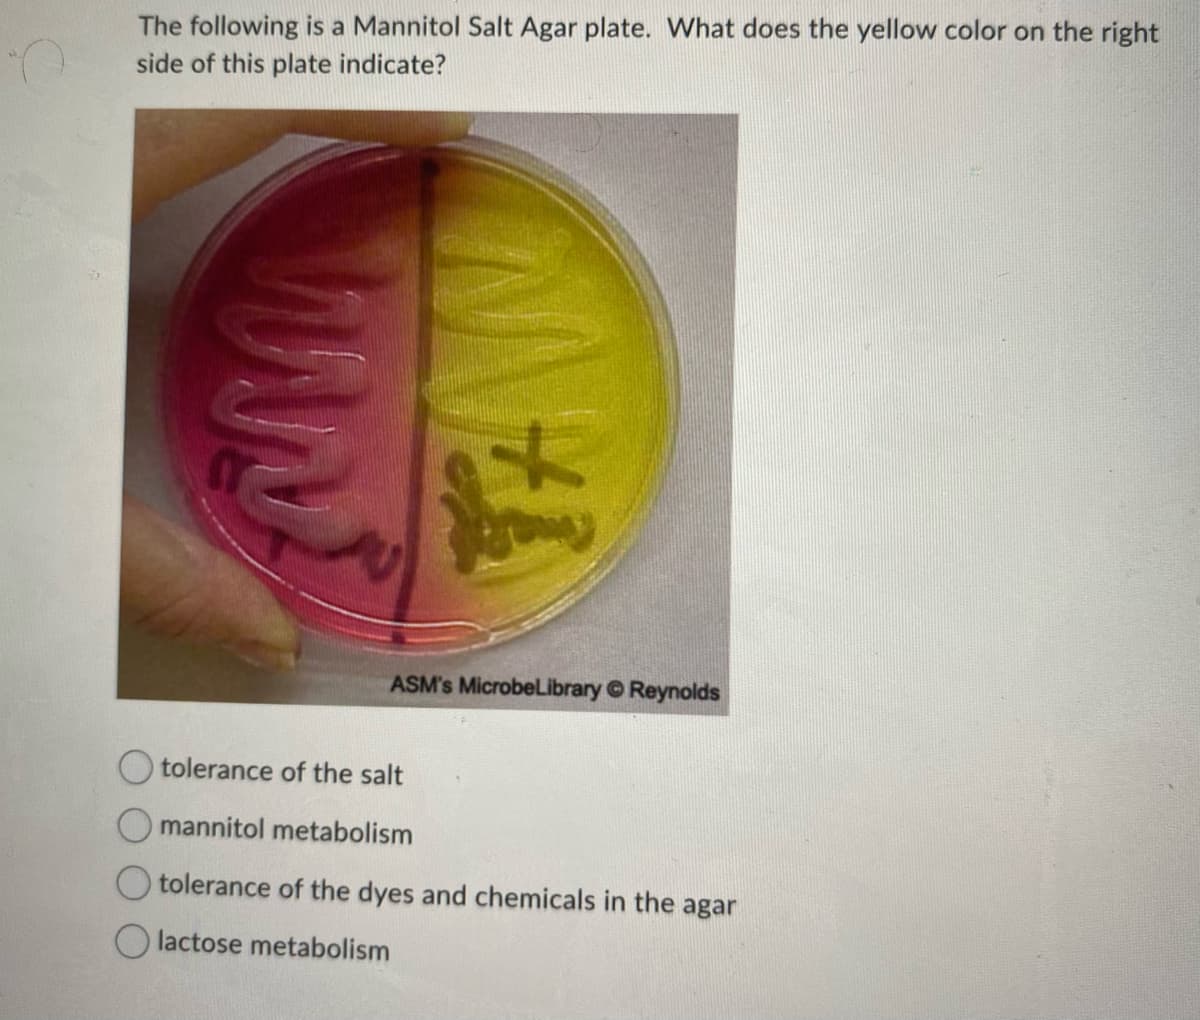 The following is a Mannitol Salt Agar plate. What does the yellow color on the right
side of this plate indicate?
TAW
ASM's MicrobeLibrary Ⓒ Reynolds
tolerance of the salt
mannitol metabolism
tolerance of the dyes and chemicals in the agar
lactose metabolism